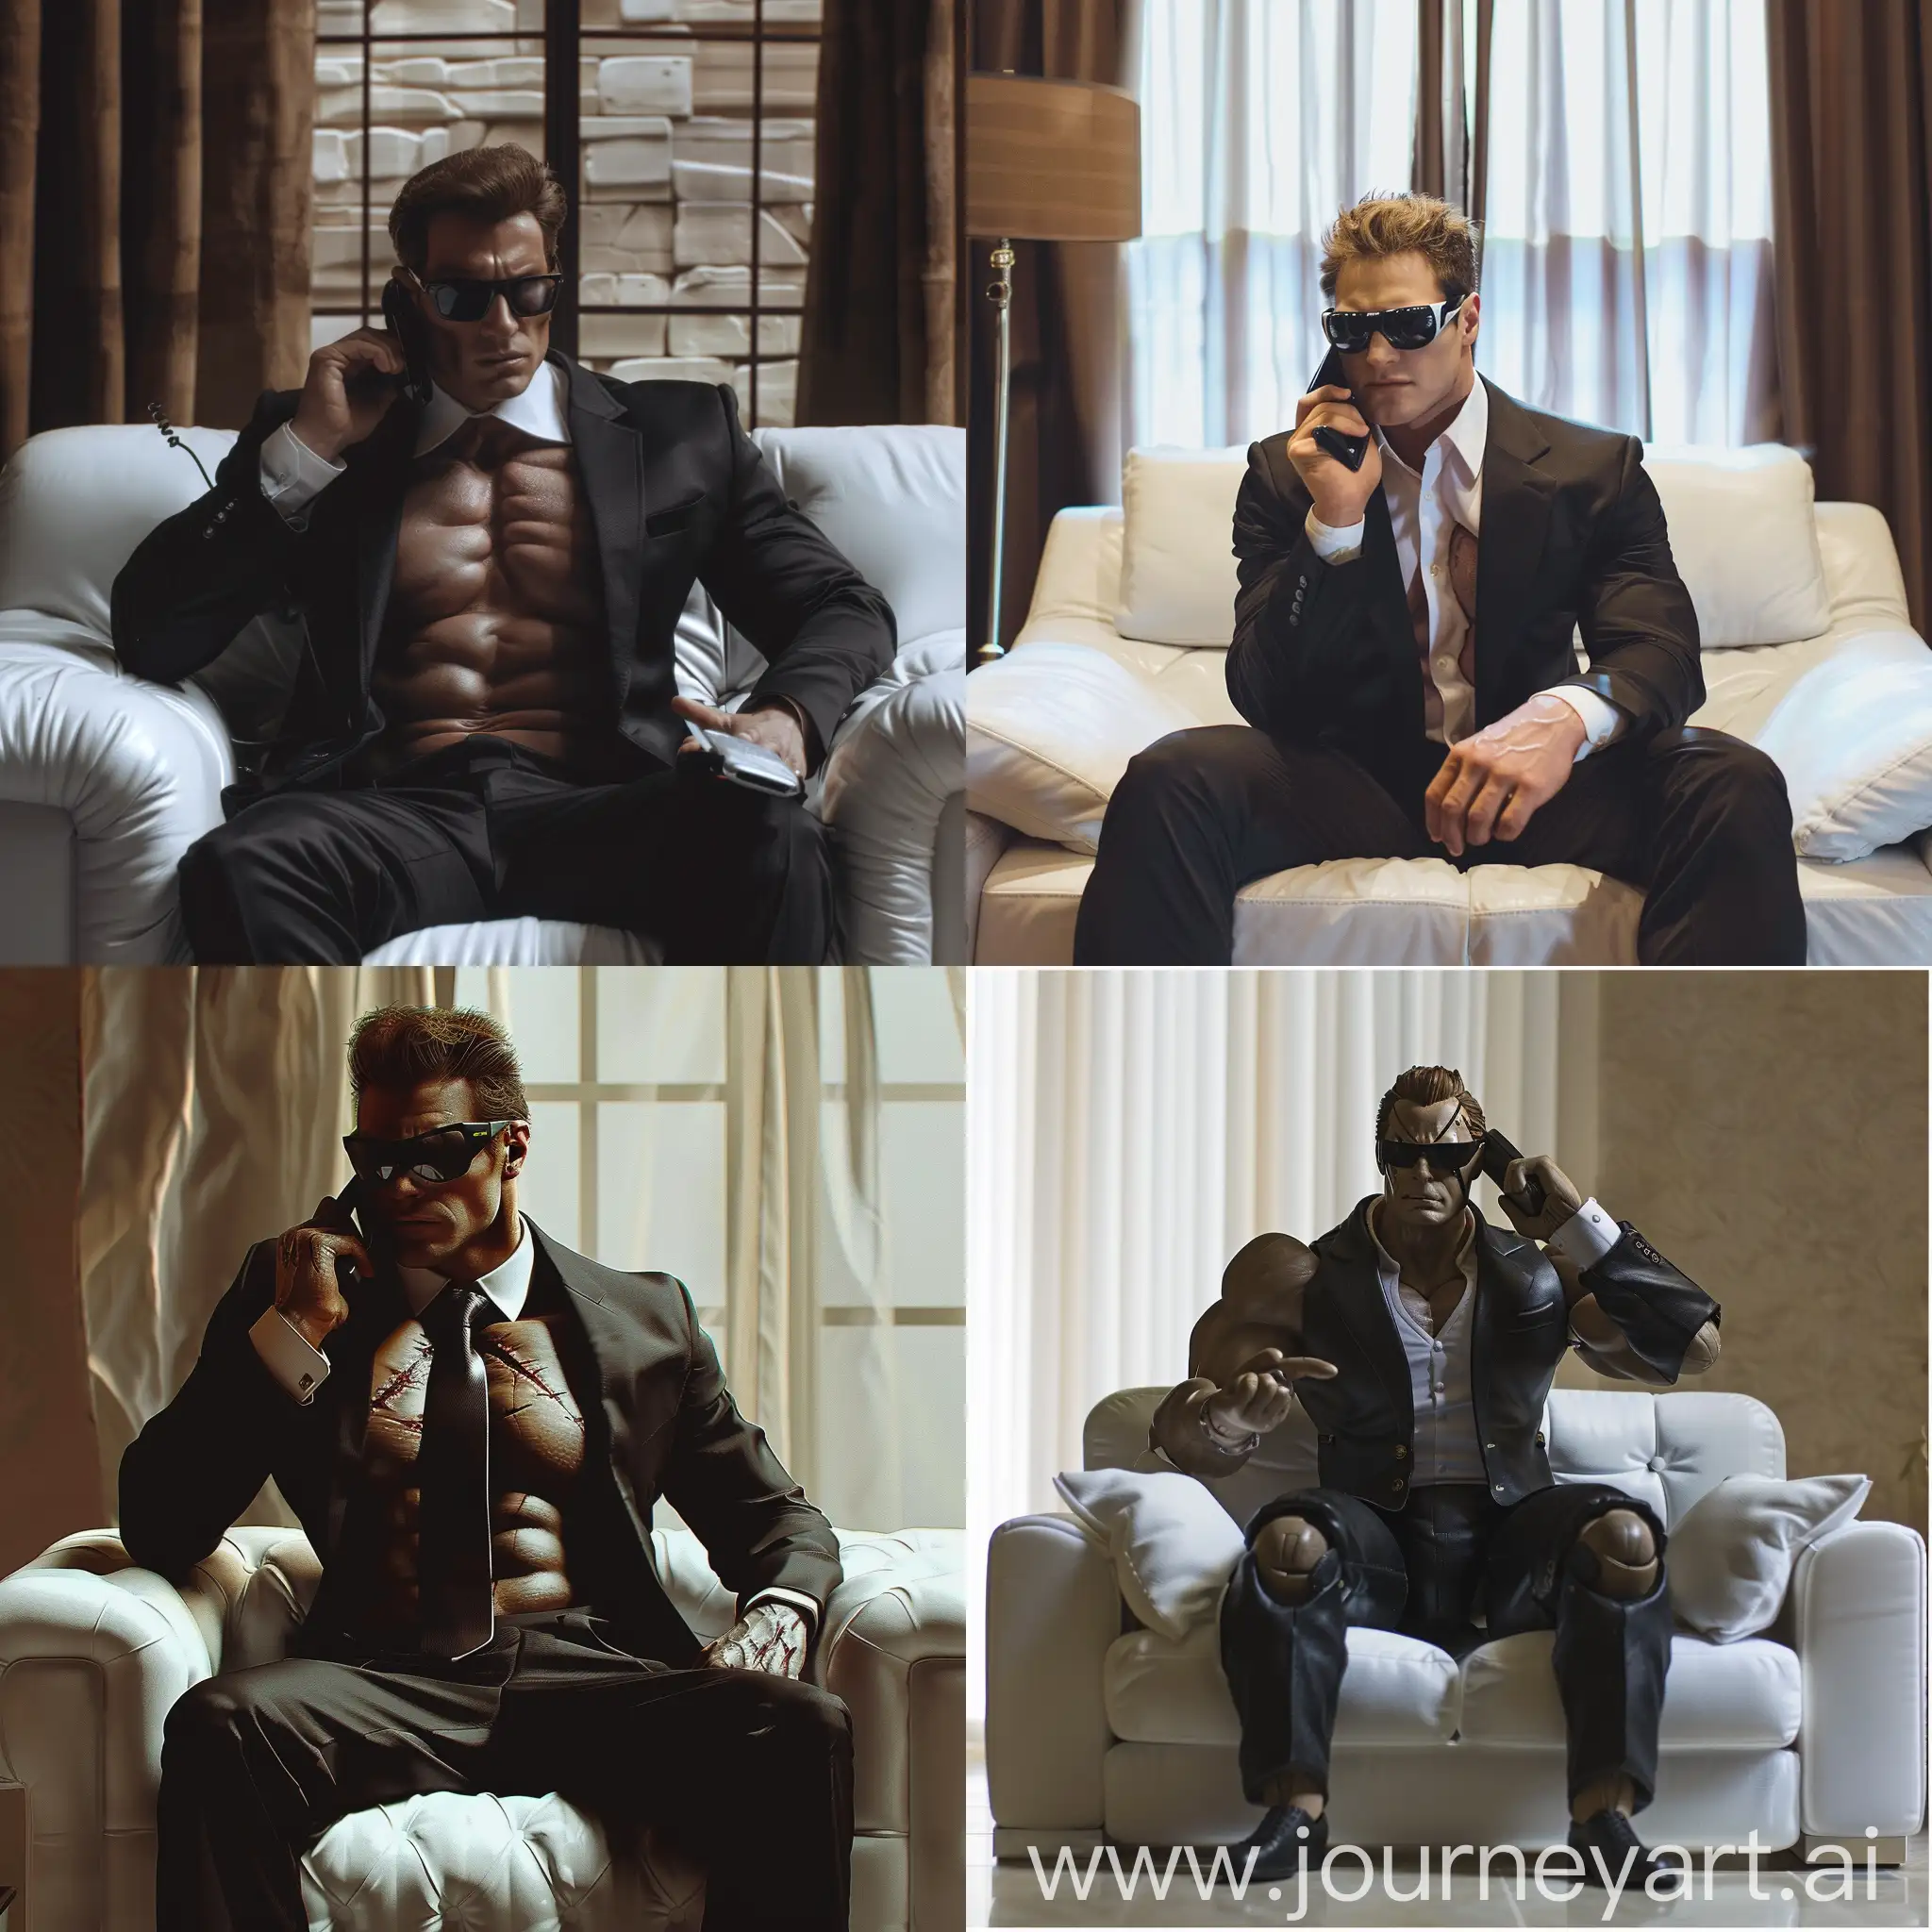 pumped-up strong fit patrick bateman with big cheekbones and pumped-up abs in a suit is sitting on a white leather sofa with sunglasses and talking on the phone